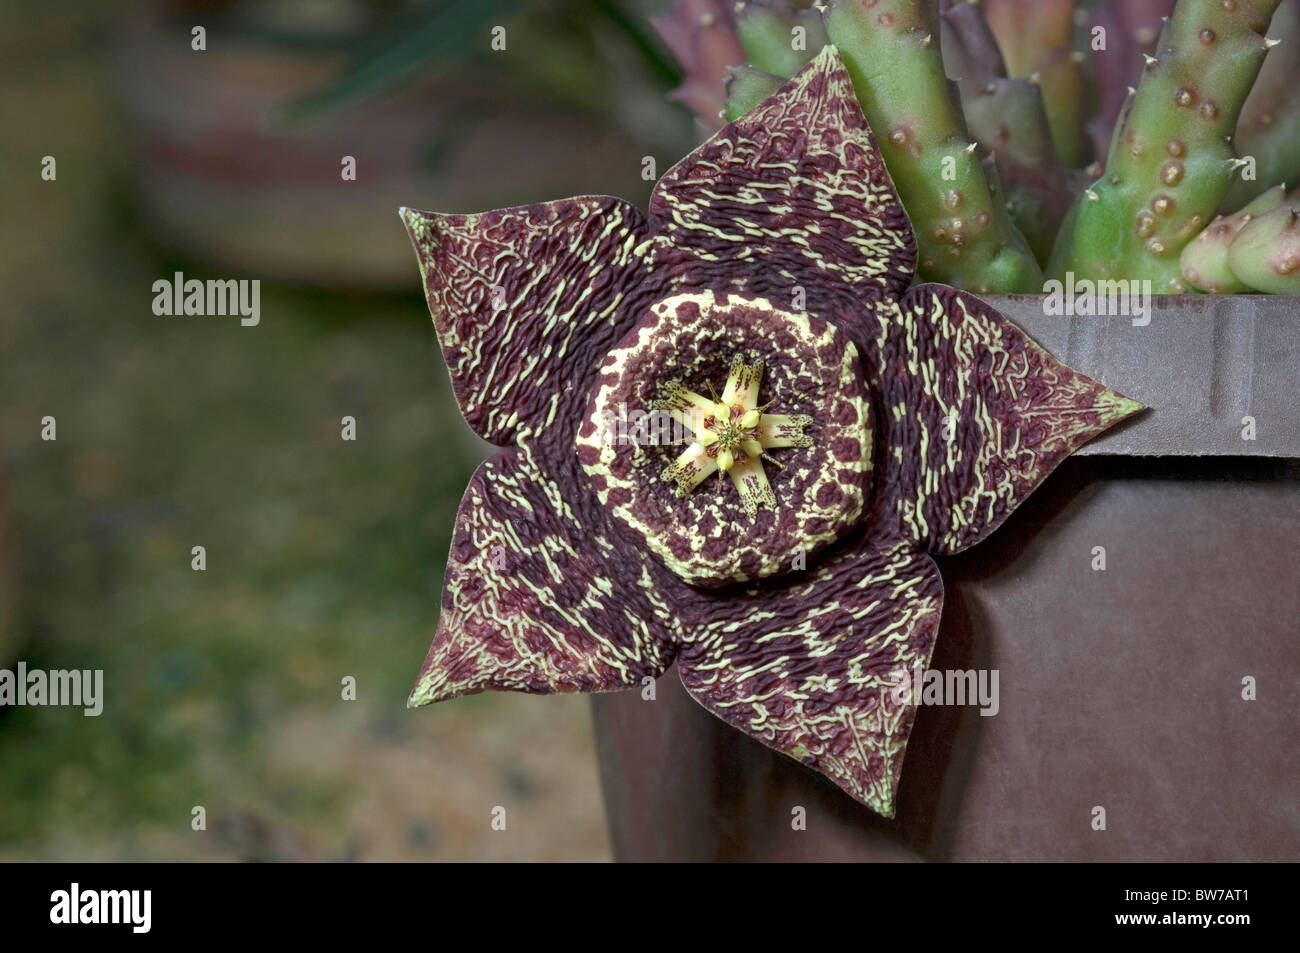 Carrion Flower, Starfish Flower (Stapelia variegata, Orbea variegata ). Carrion smell attract flies, which polinate flowers. Stock Photo